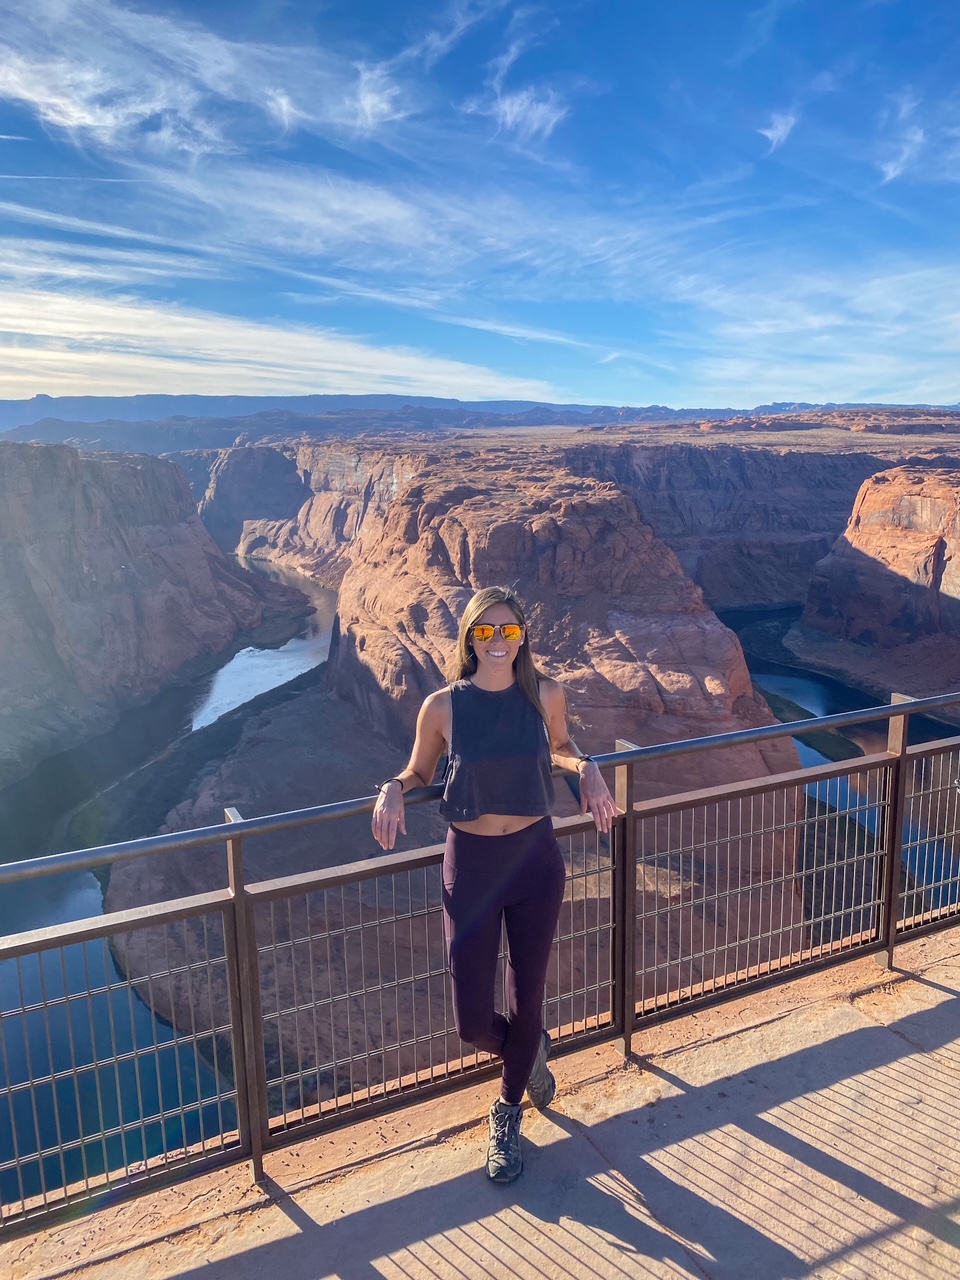 Me at the Horseshoe Bend Viewpoint